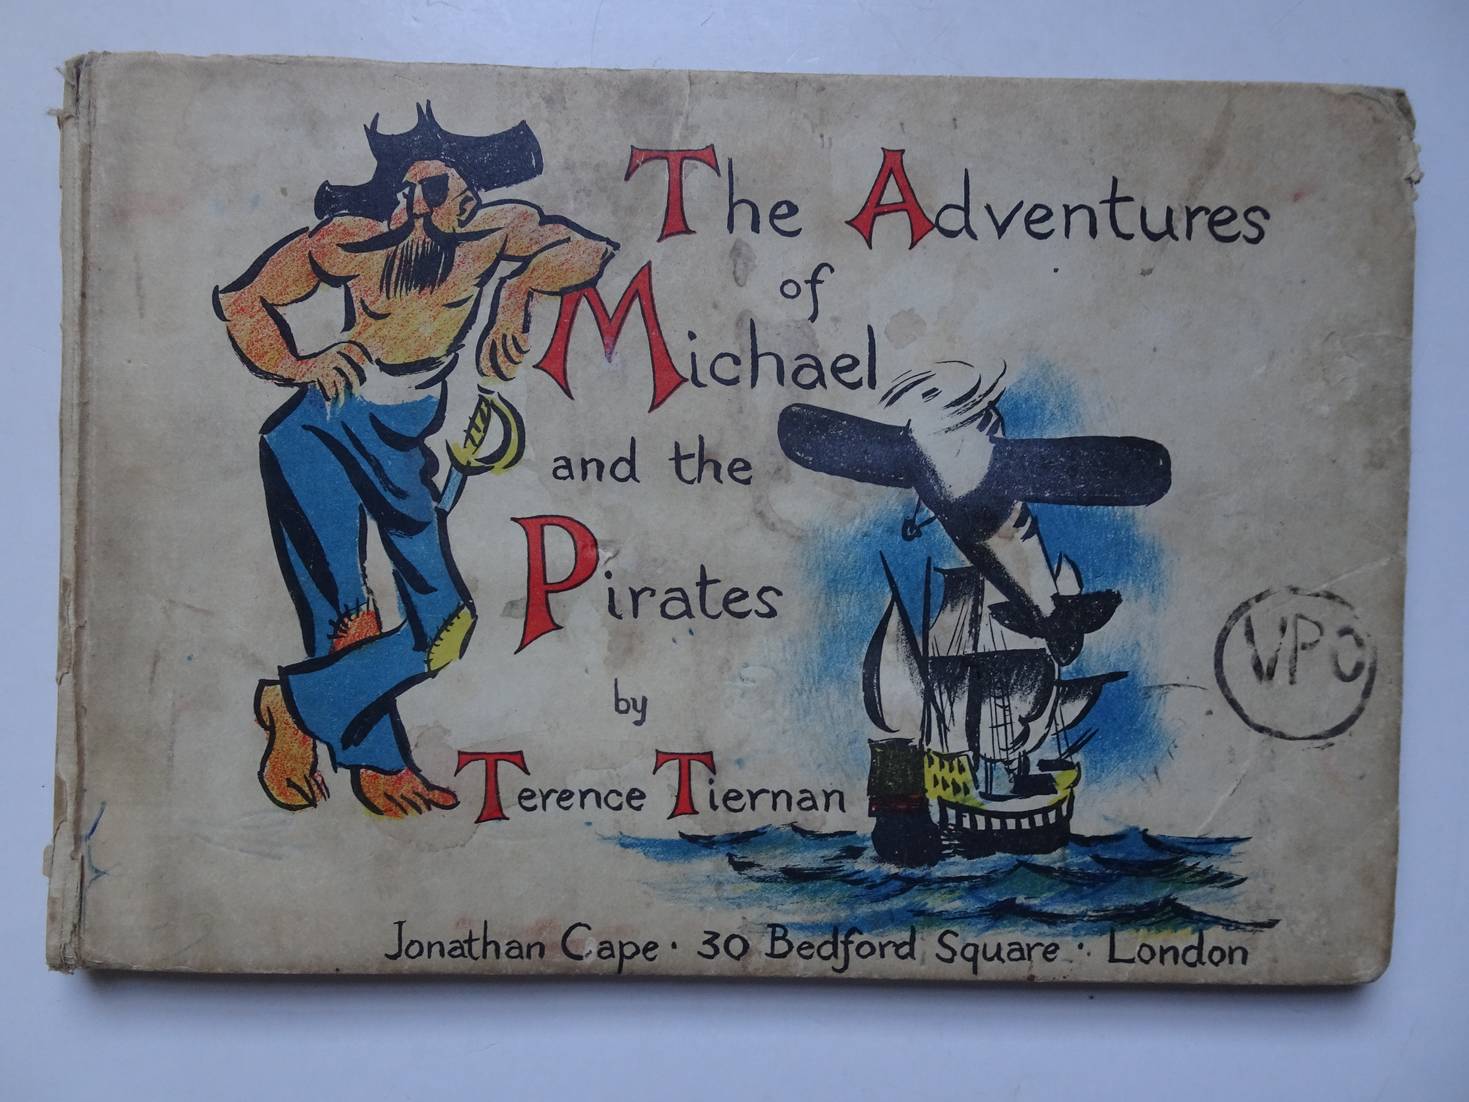 Tiernan, Terence. - The Adventures of Michael and the Pirates.